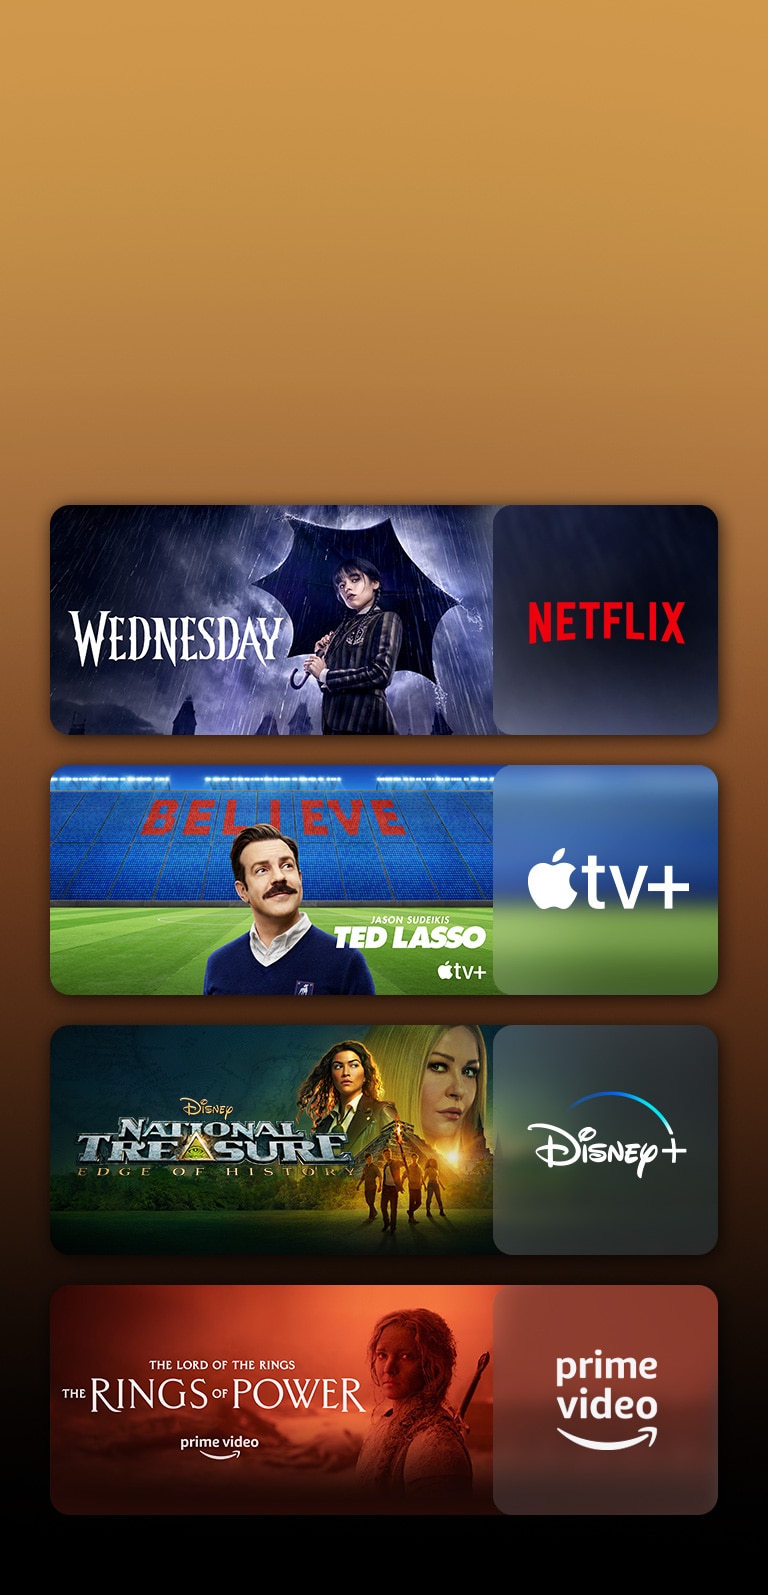 LG 32LR656BPSA There are logos of streaming service platforms and matching footages right next to each logo. There are images of Netflix's Wednesday, Apple TV's TED LASSO, Disney Plus's National Treasure and PRIME VIDEO's The rings of power.